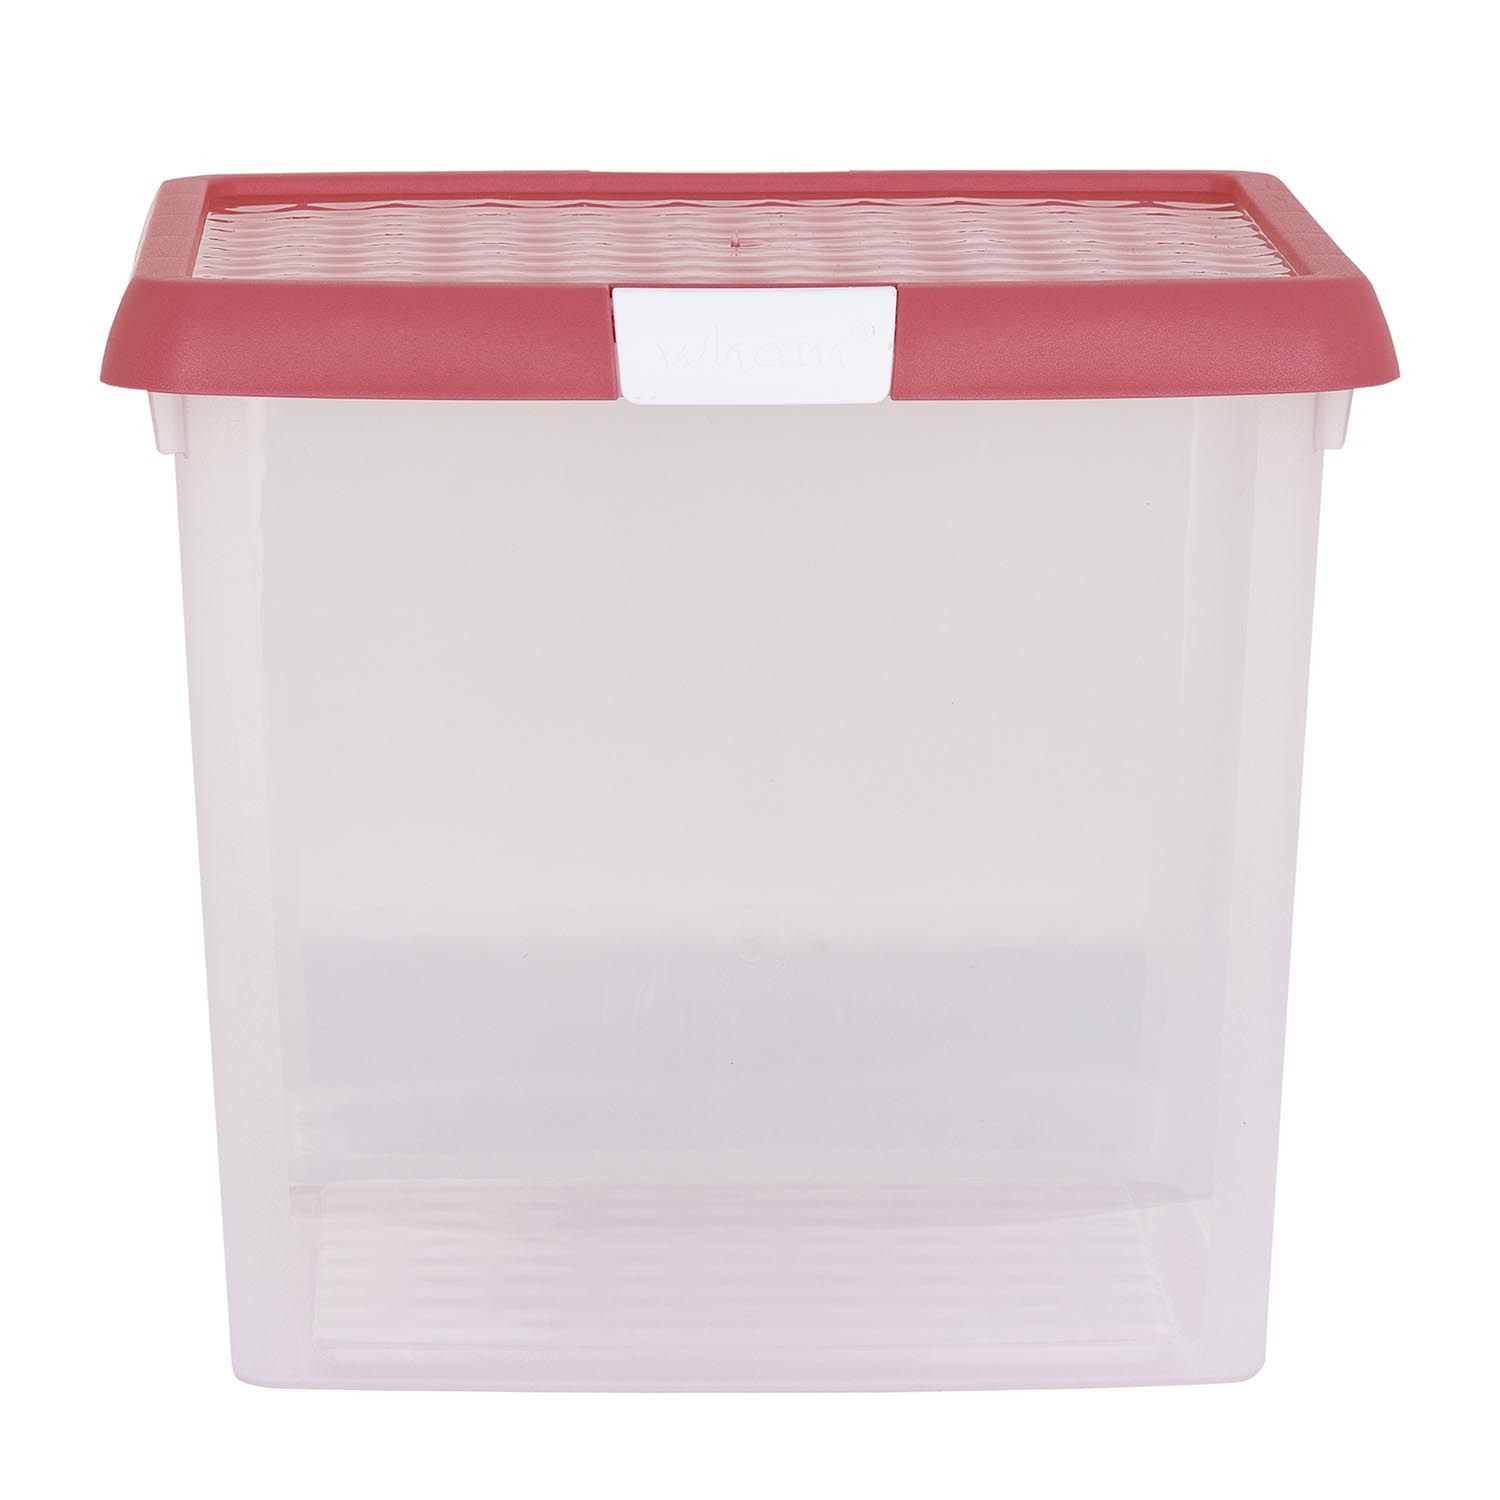 Wham 14L Red/White Storage Box with Clip Lid Image 1